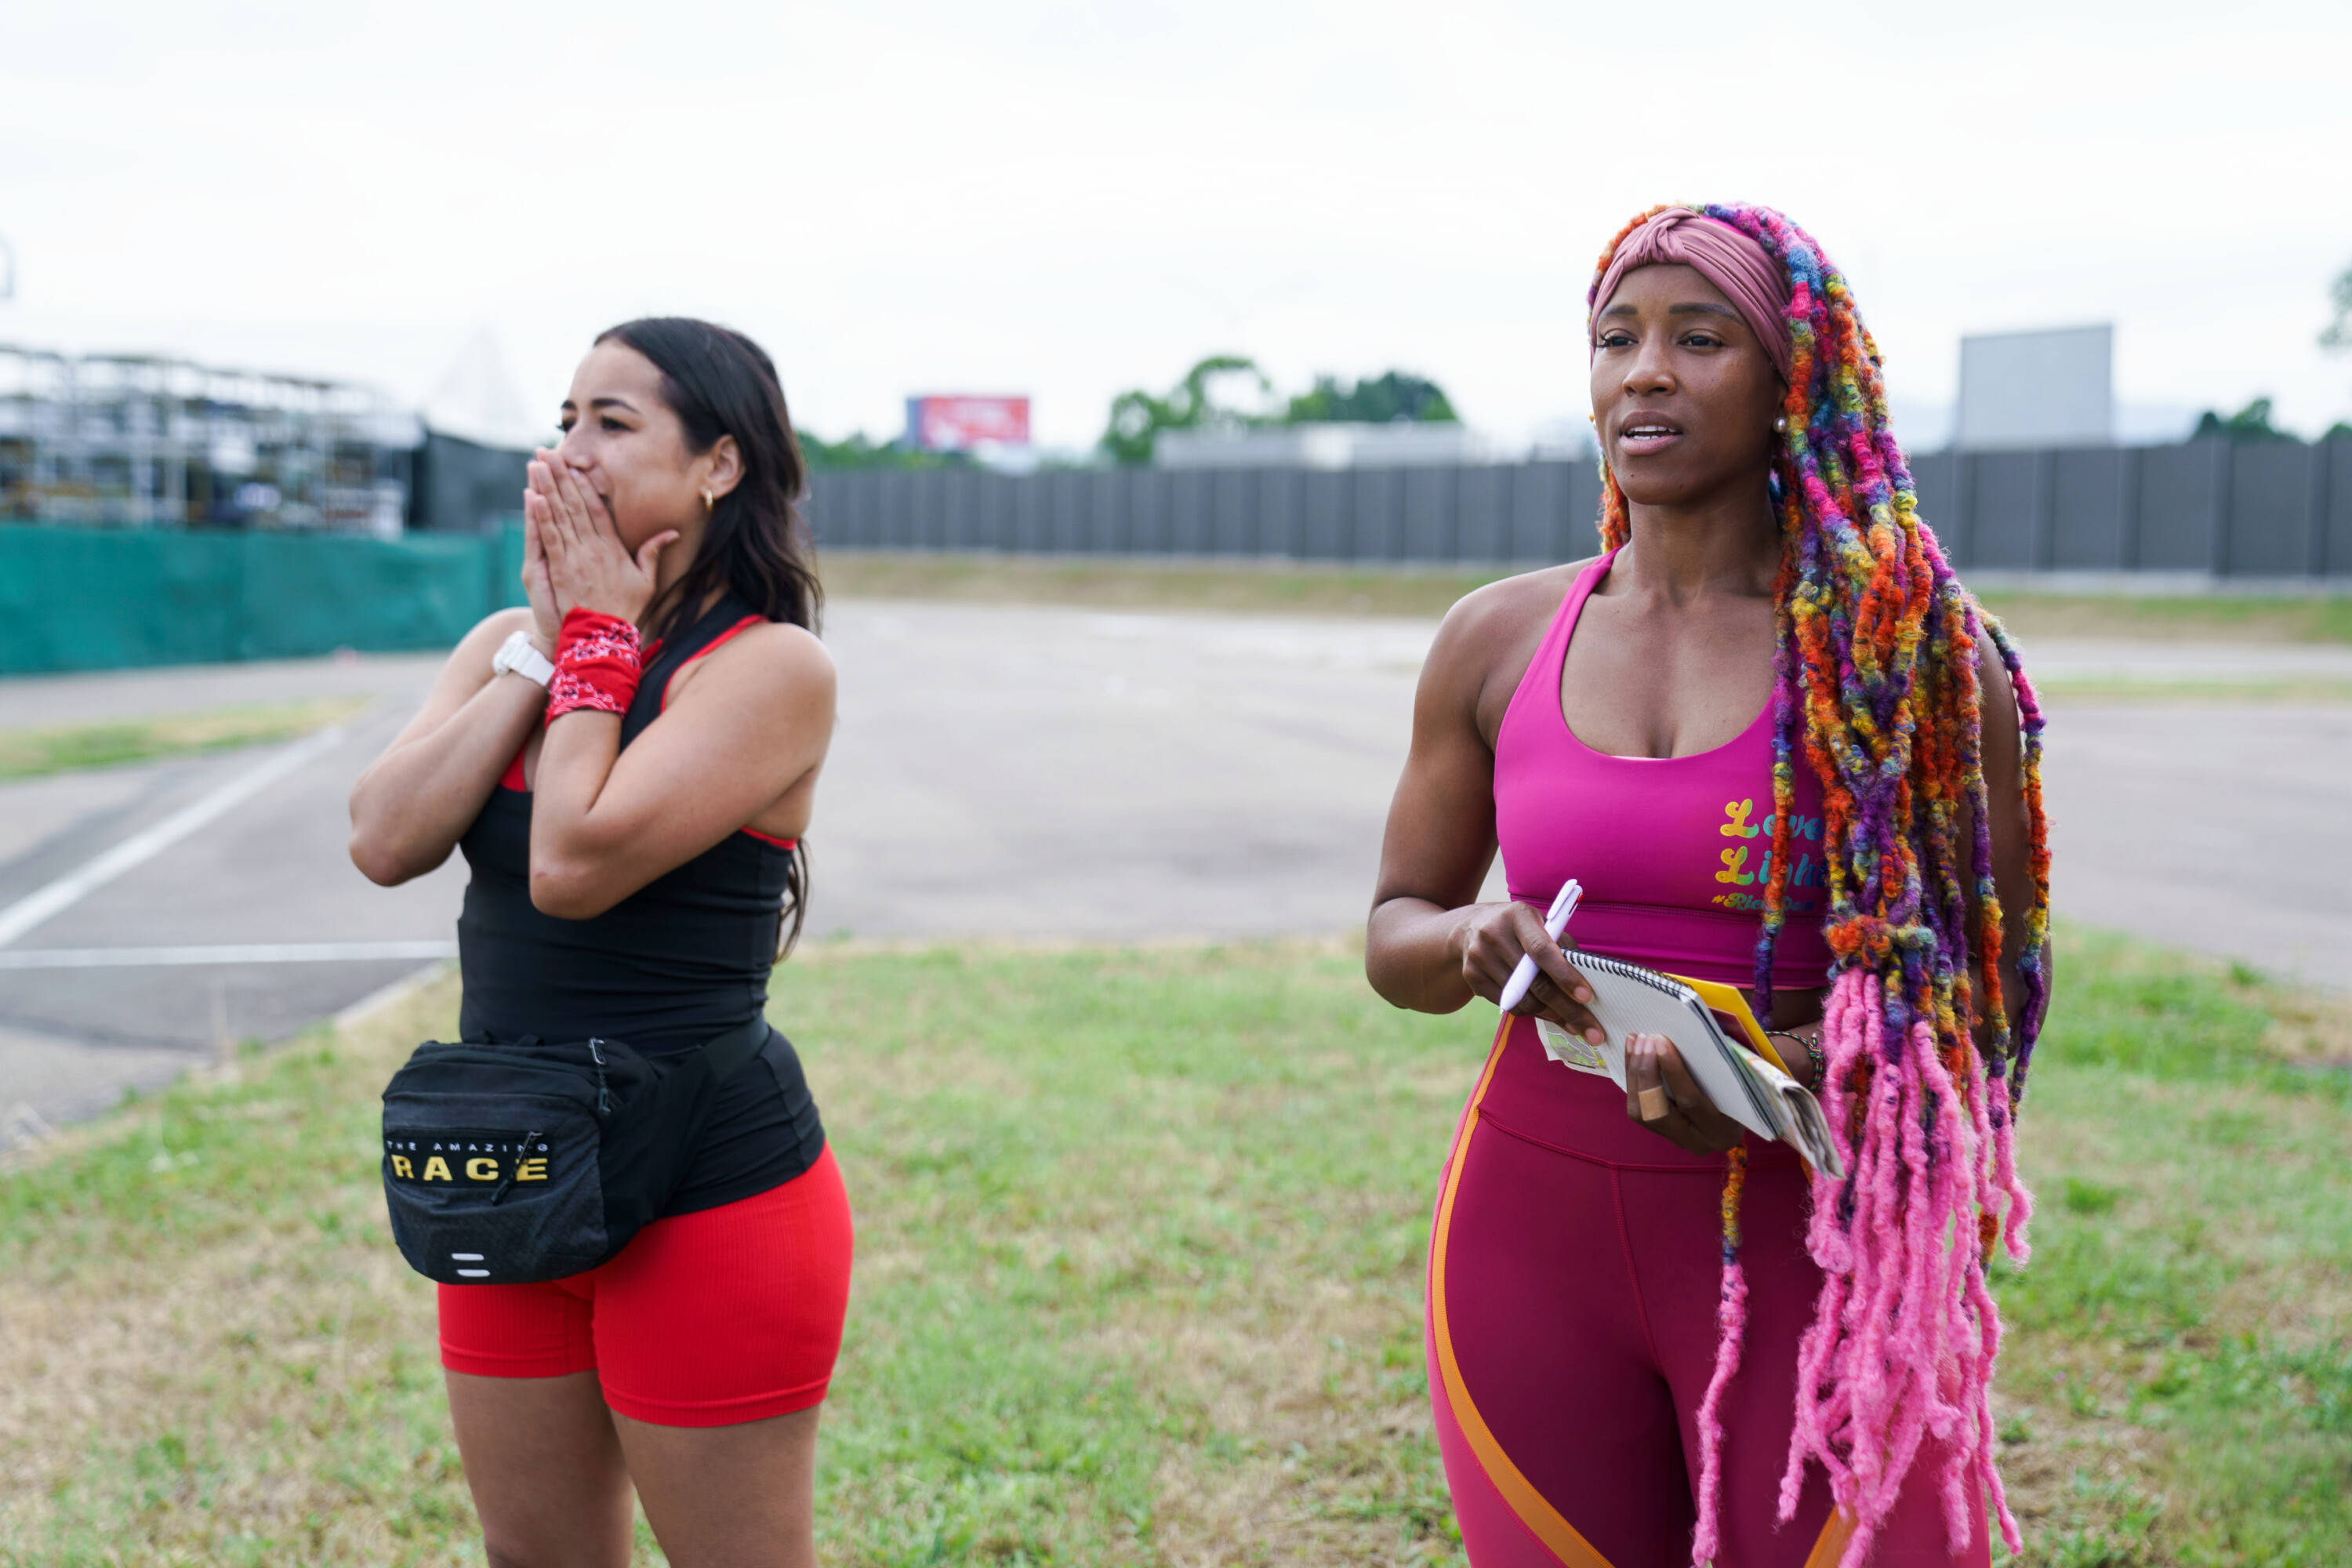 Michelle Burgos and Dom Jones, who star in 'The Amazing Race' Season 34 tonight, Oct. 5, on CBS, stand next to each other at a challenge. Michelle wears a black tank top and red shorts. Dom wears a pink sports bra and pink leggings.